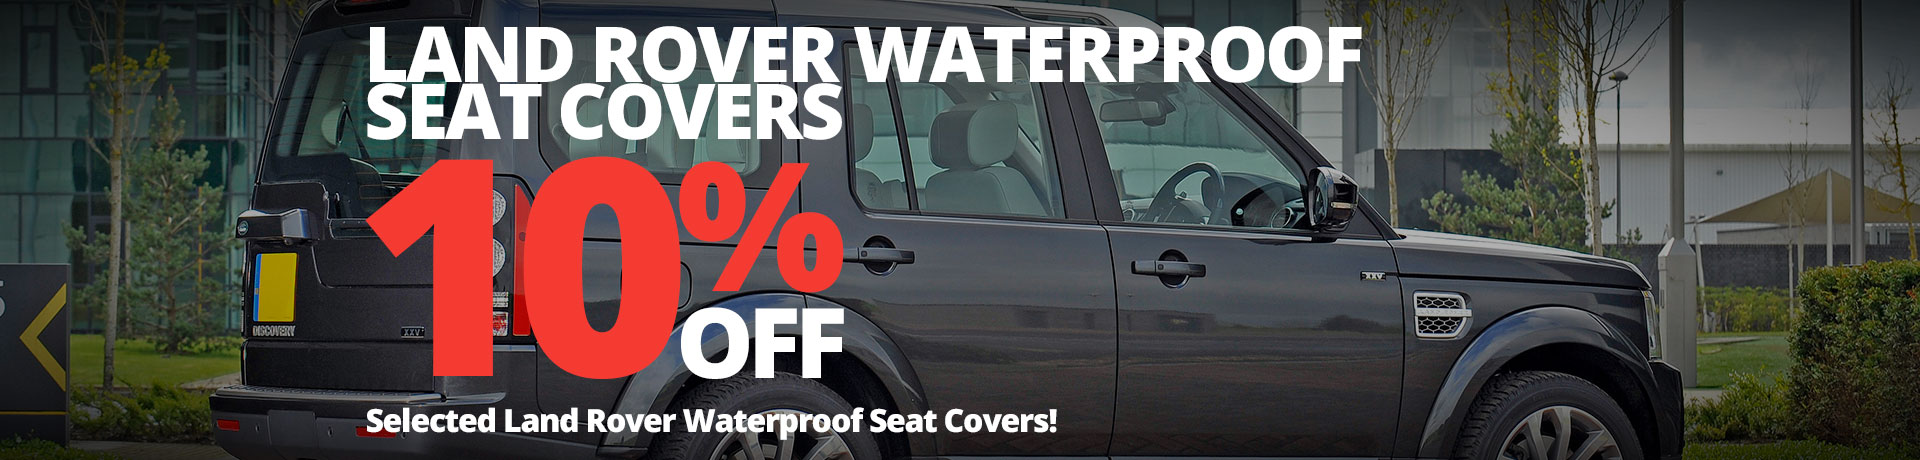 10% off Land Rover Waterproof Seat Covers